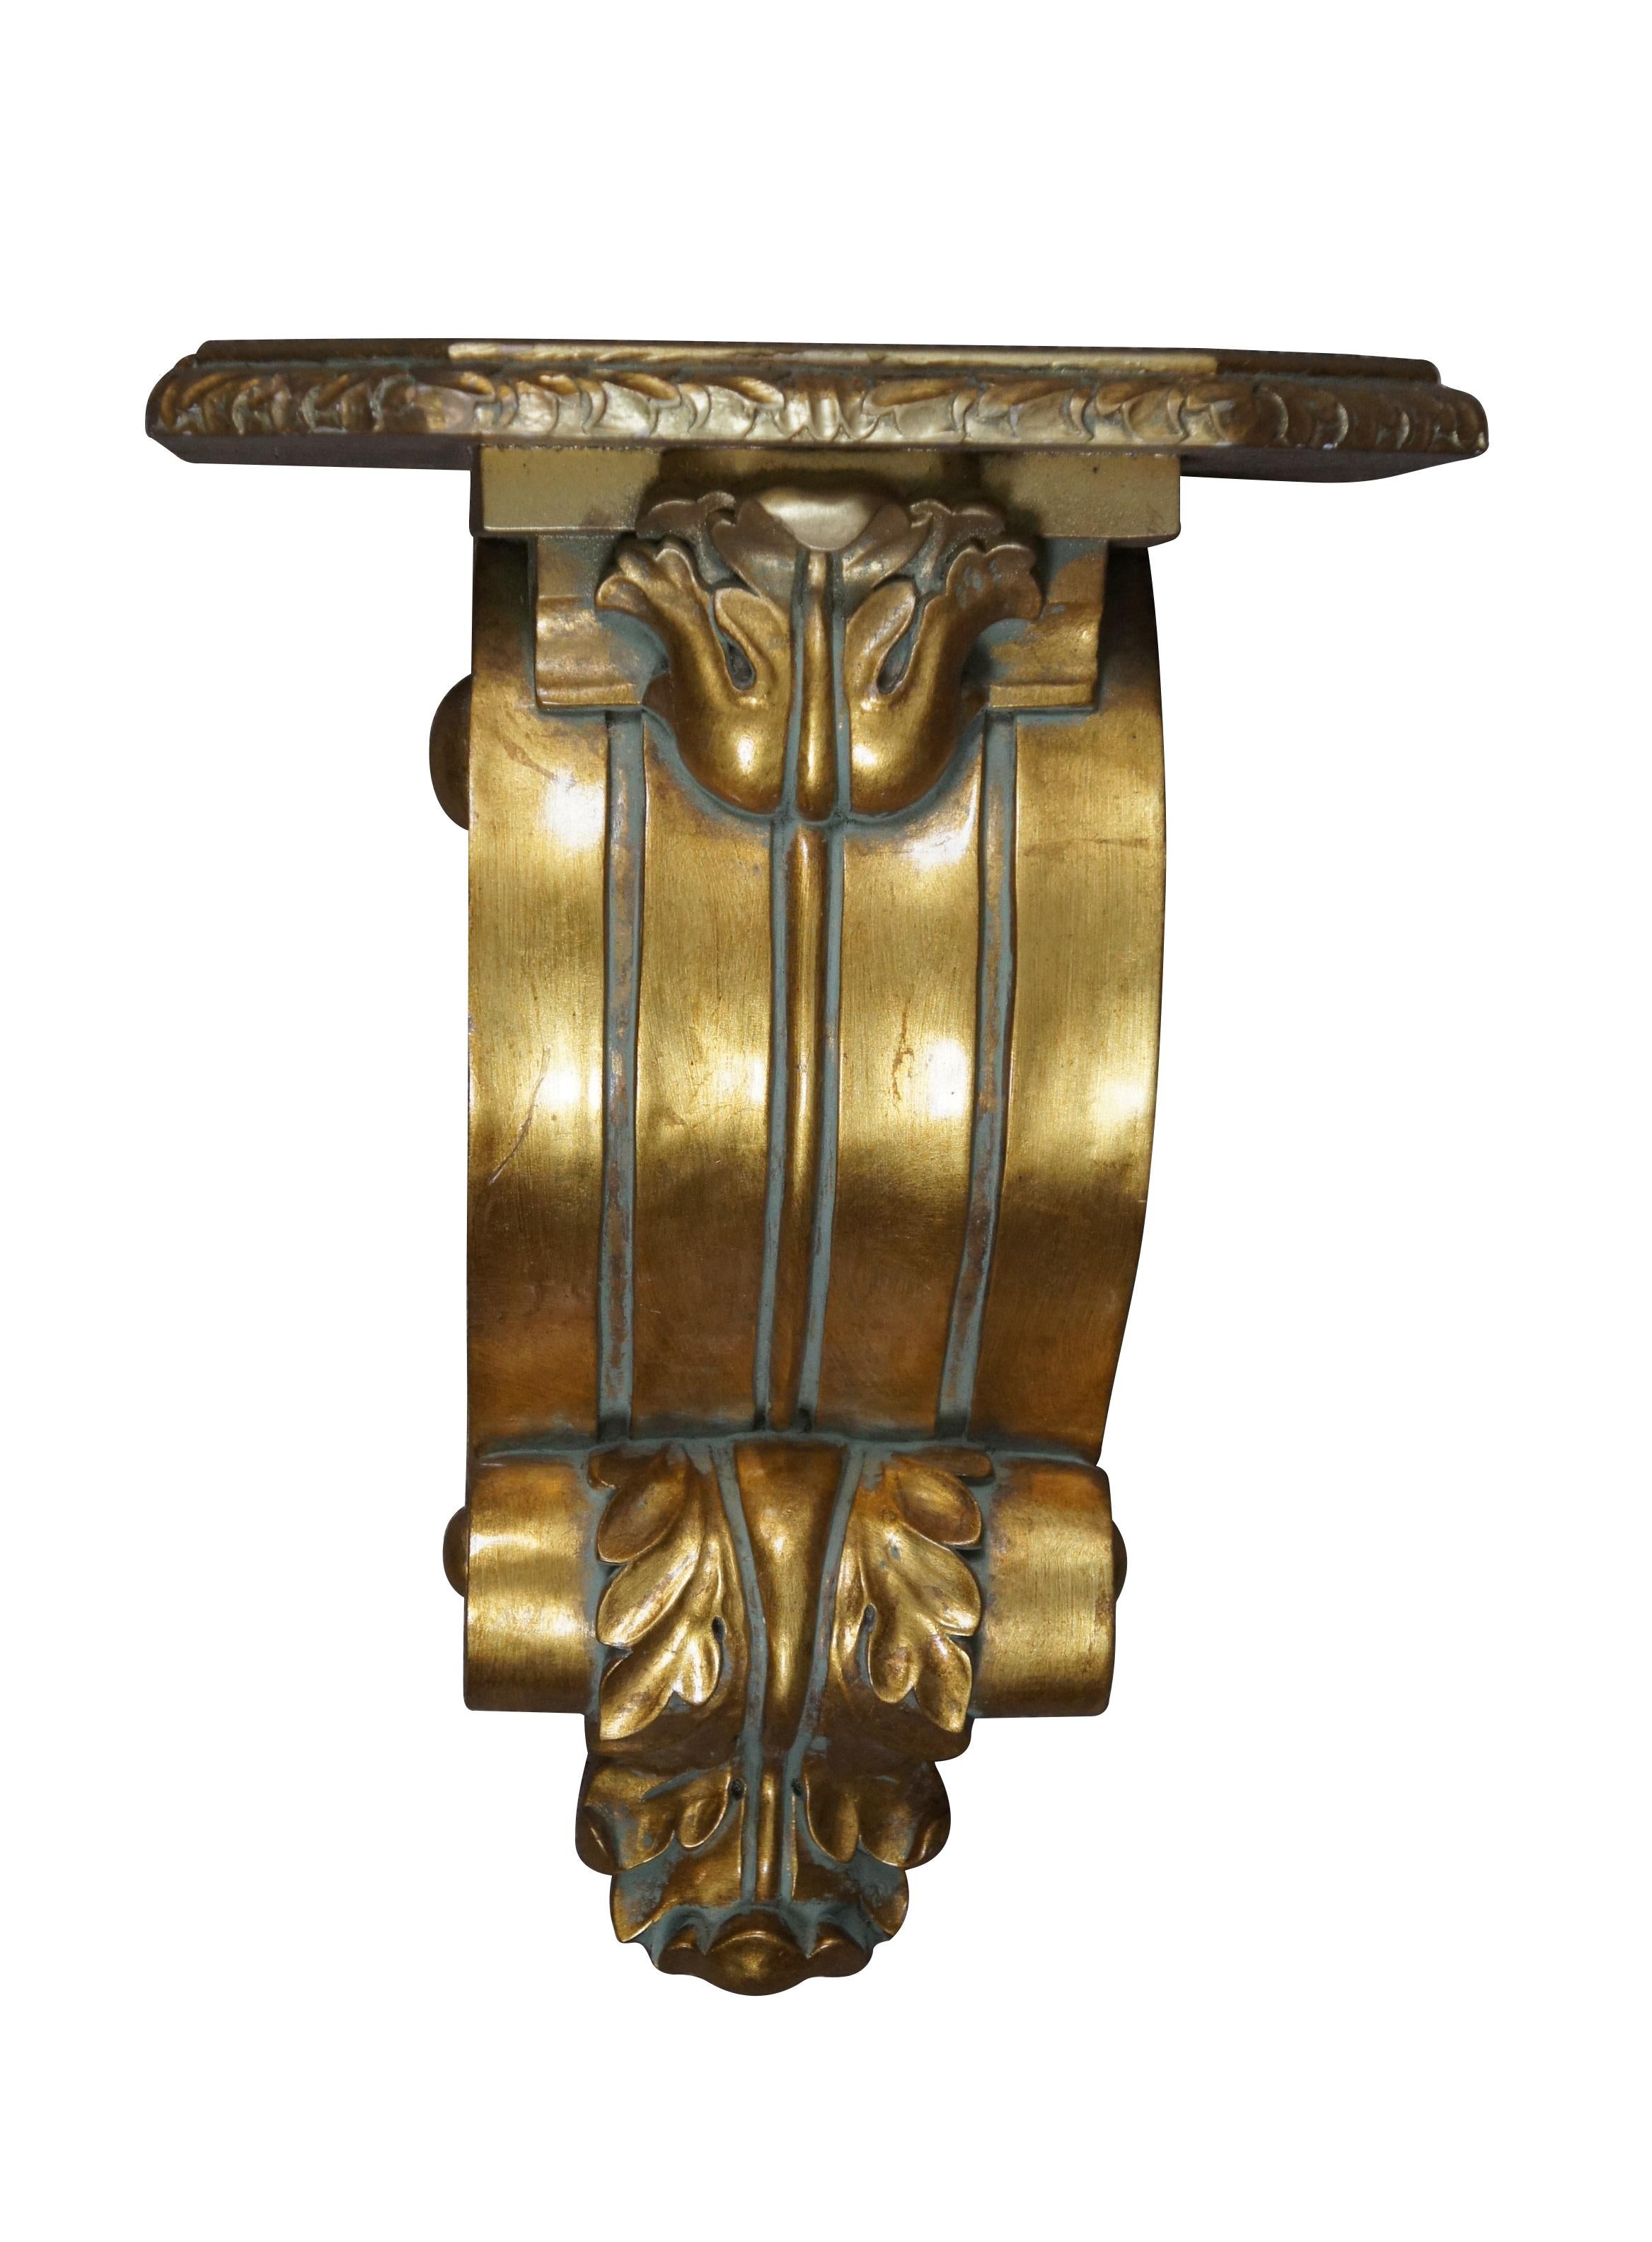 Pair of vintage 20th century giltwood corbels / wall brackets, featuring a grooved scrollwork body embellished with acanthus leaves. Rectangular top with clipped corners and foliate edge detail. WB-1016

Dimensions:
14.5